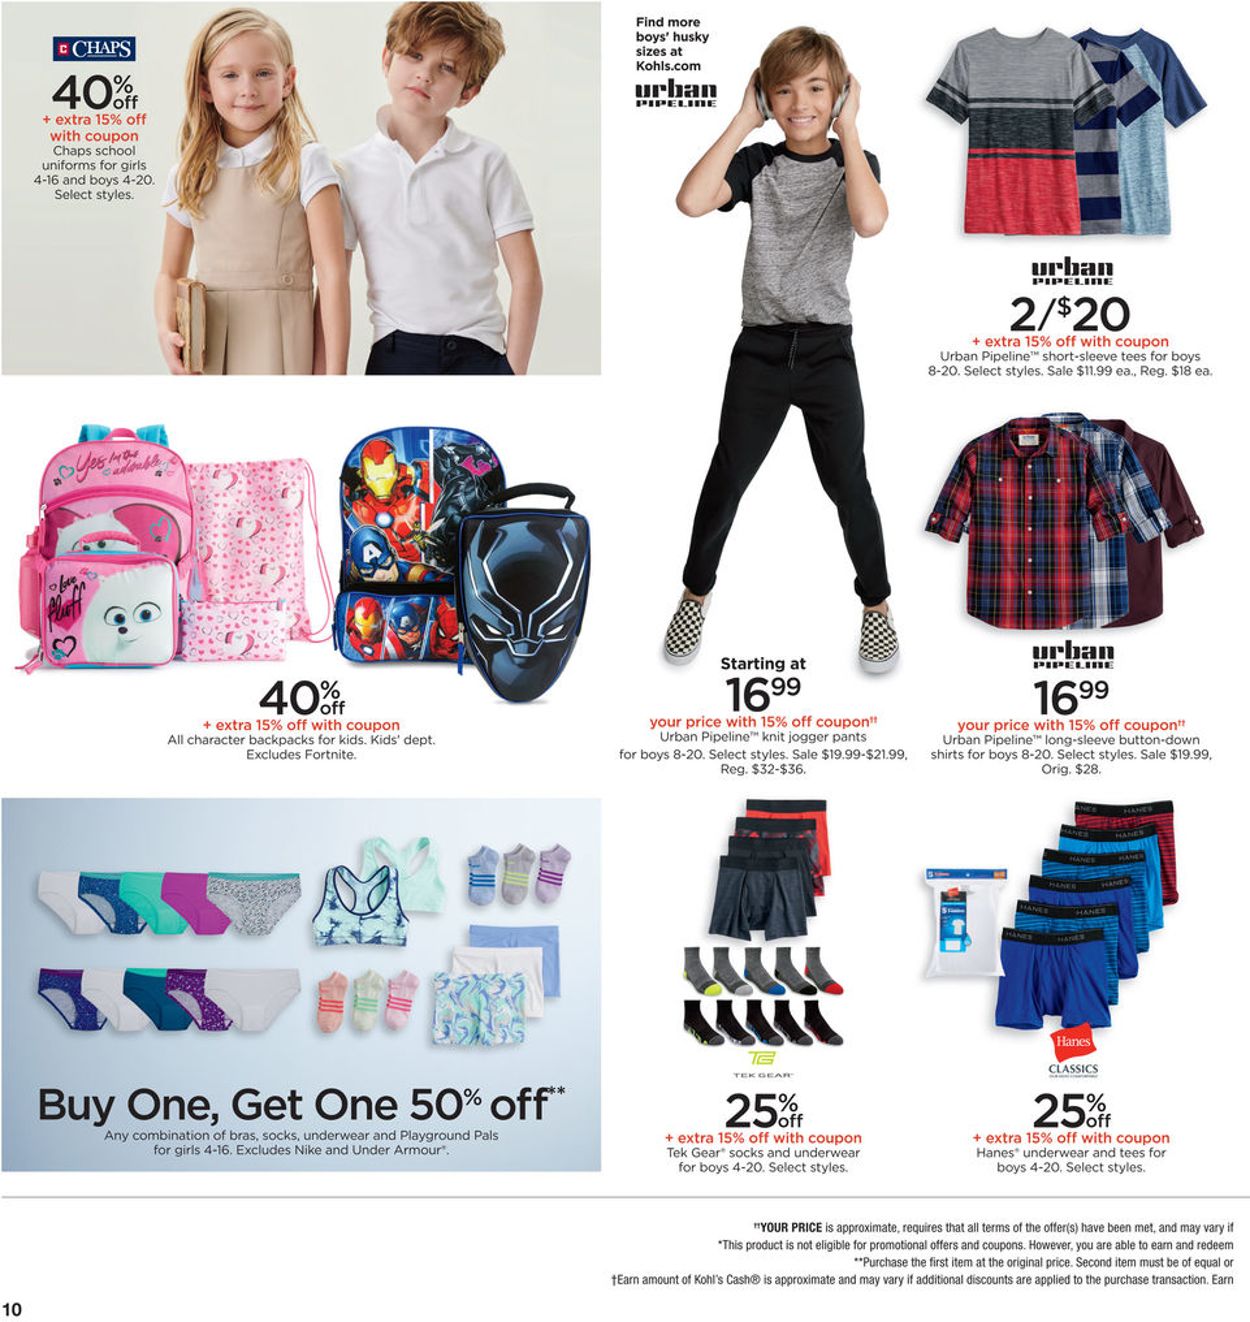 Kohl's Current weekly ad 08/21 - 08/28/2019 [10] - frequent-ads.com